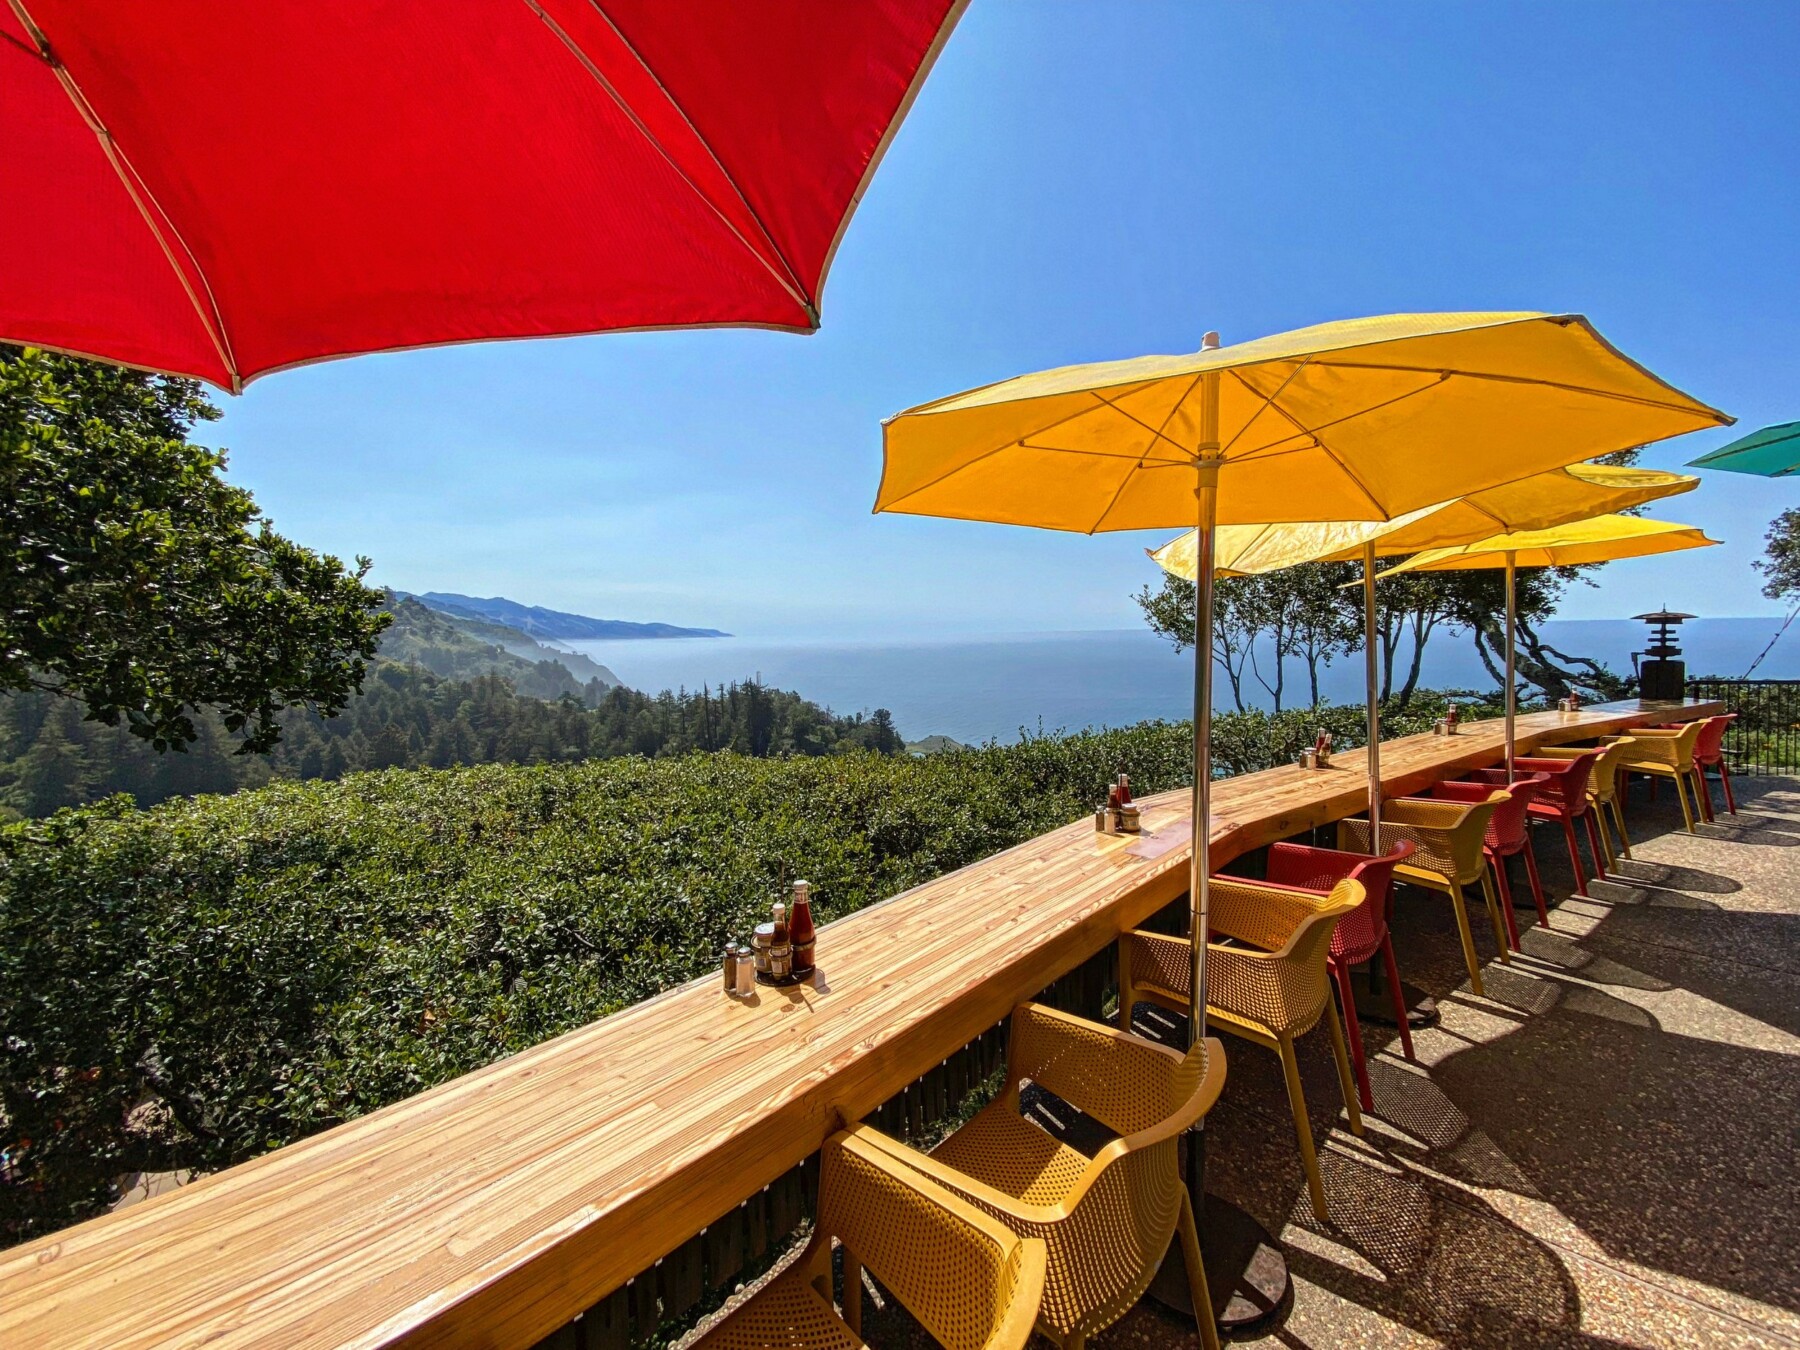 Ocean view from Nepenthe restaurant's patio in Big Sur, California